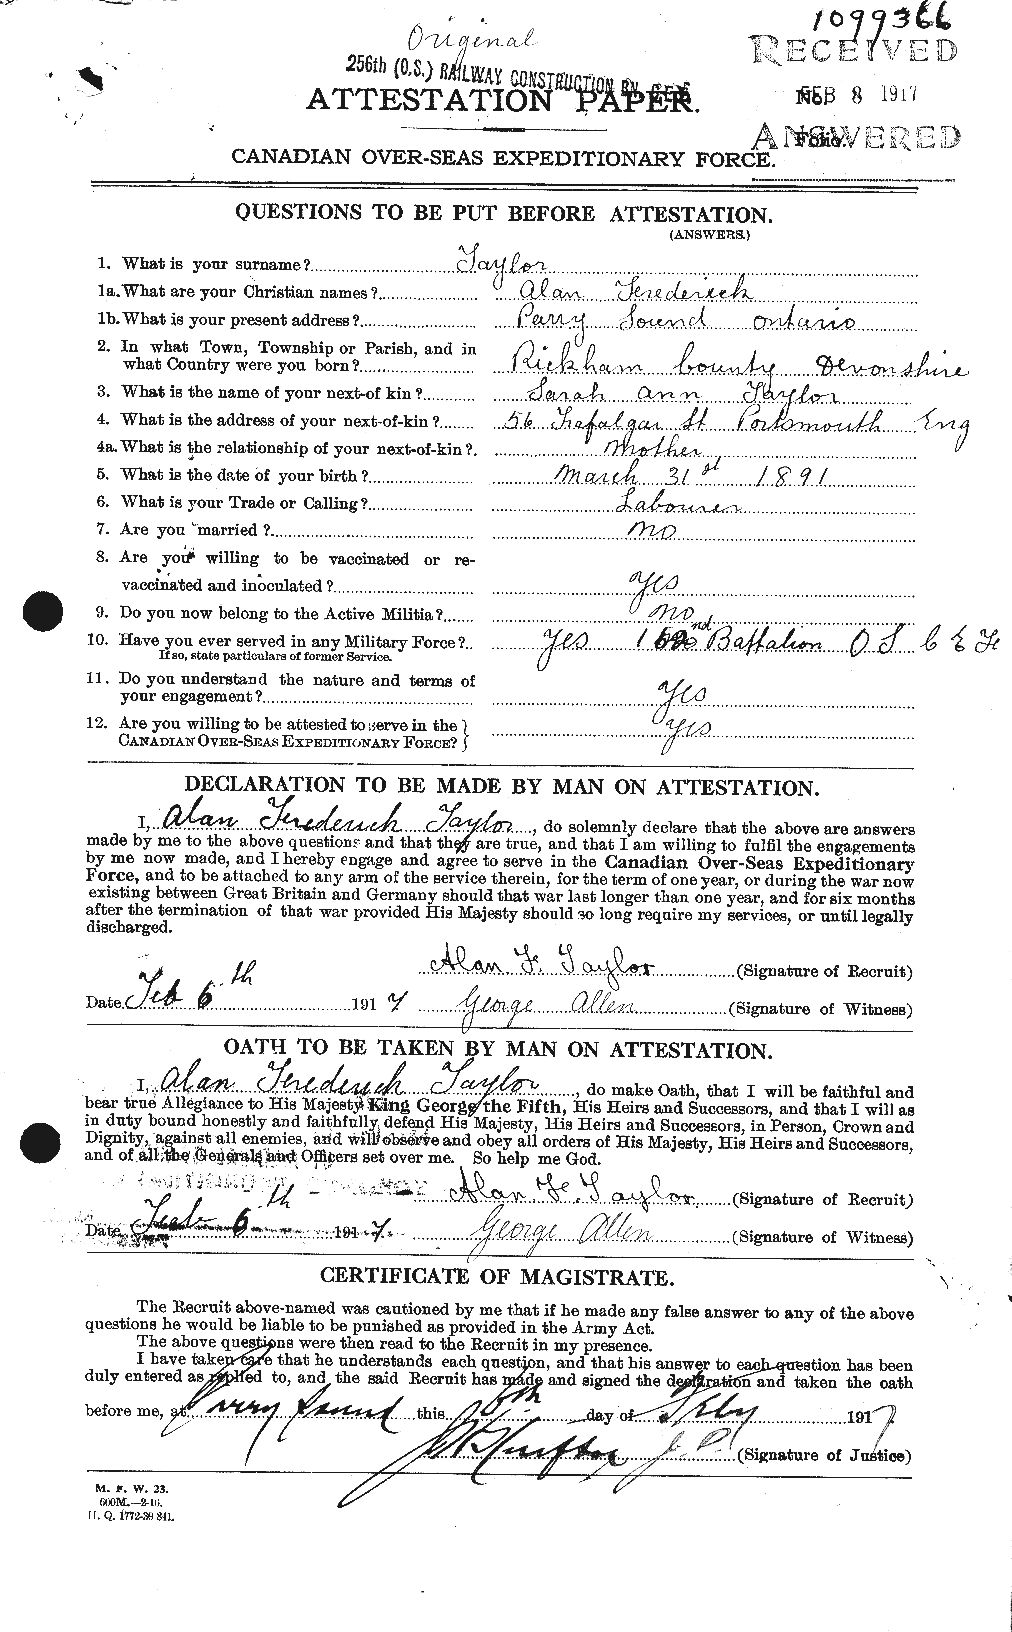 Personnel Records of the First World War - CEF 626206a